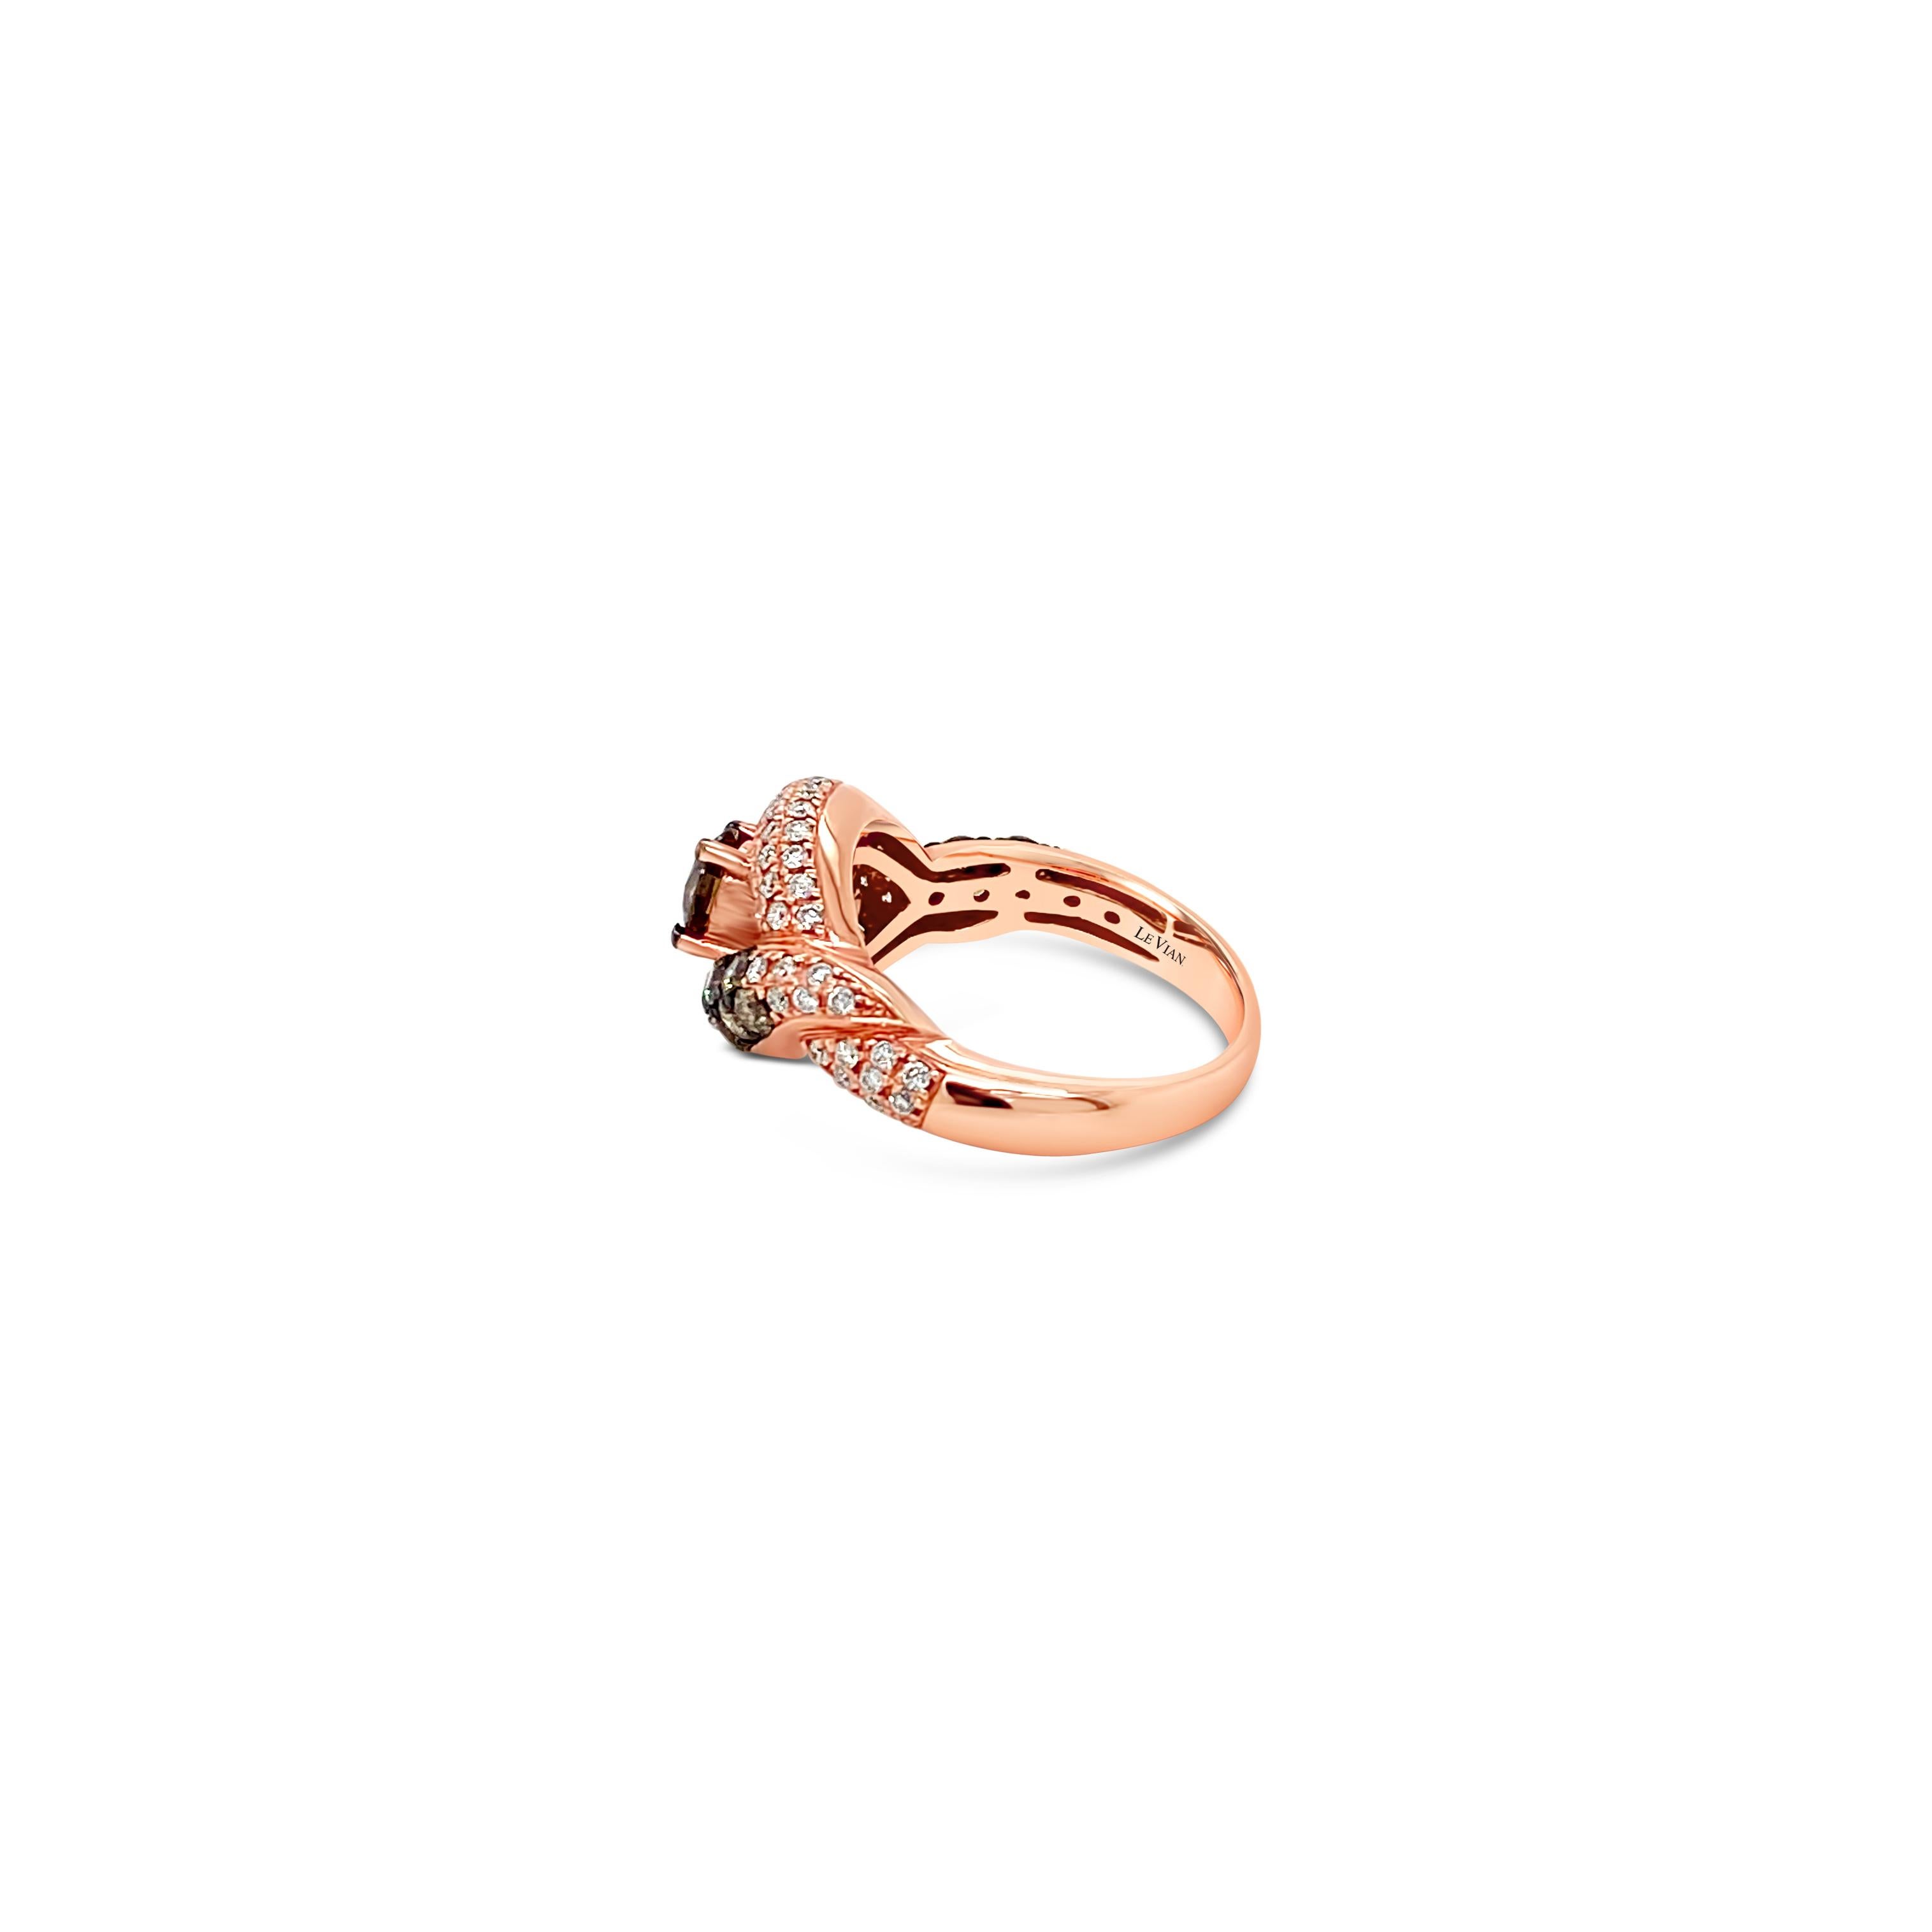 LeVian 14K Rose Gold Round Chocolate Brown Diamond Eye Shape Cocktail Ring In New Condition For Sale In Great Neck, NY